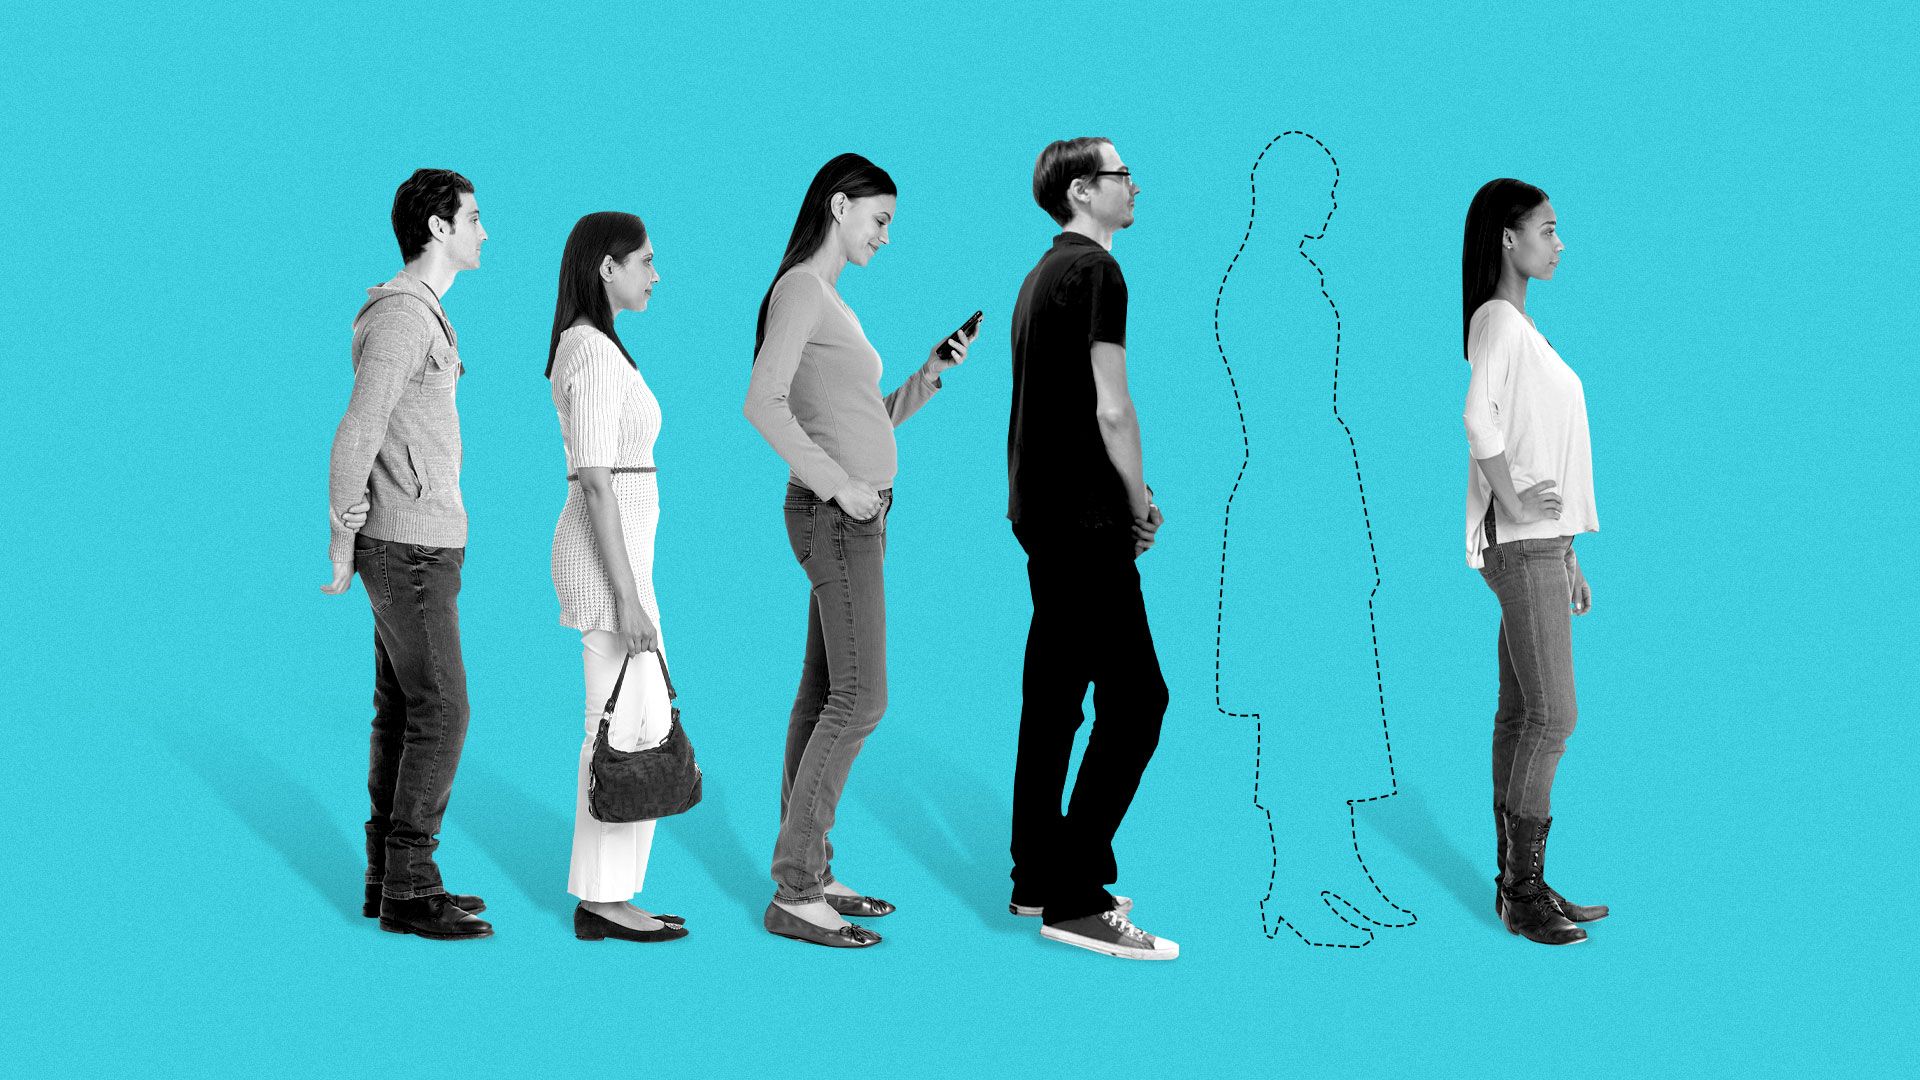 Illustration of people standing in a line with one person as a silhouette.